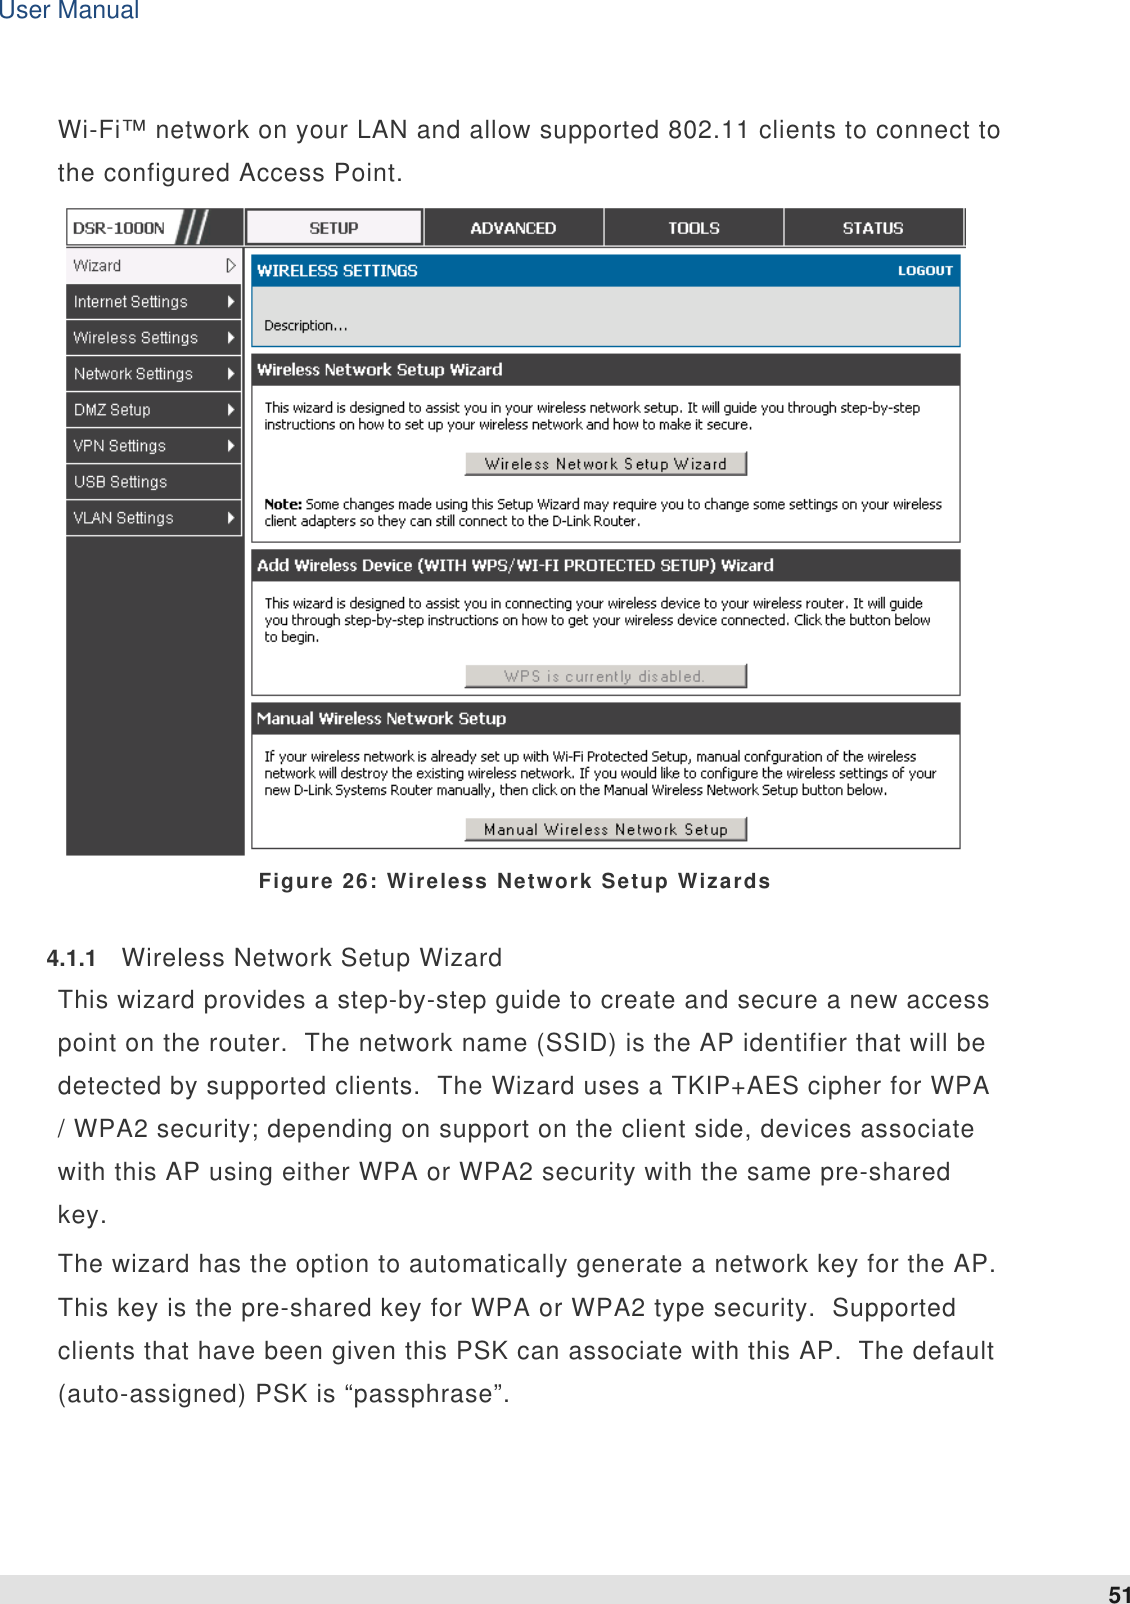 User Manual 51   Wi-Fi™ network on your LAN and allow supported 802.11 clients to connect to the configured Access Point.   Figure 26: Wireless Network Setup Wizards 4.1.1  Wireless Network Setup Wizard This wizard provides a step-by-step guide to create and secure a new access point on the router.  The network name (SSID) is the AP identifier that will be detected by supported clients.  The Wizard uses a TKIP+AES cipher for WPA / WPA2 security; depending on support on the client side, devices associate with this AP using either WPA or WPA2 security with the same pre-shared key. The wizard has the option to automatically generate a network key for the AP.  This key is the pre-shared key for WPA or WPA2 type security.  Supported clients that have been given this PSK can associate with this AP.  The default (auto-assigned) PSK is “passphrase”.   